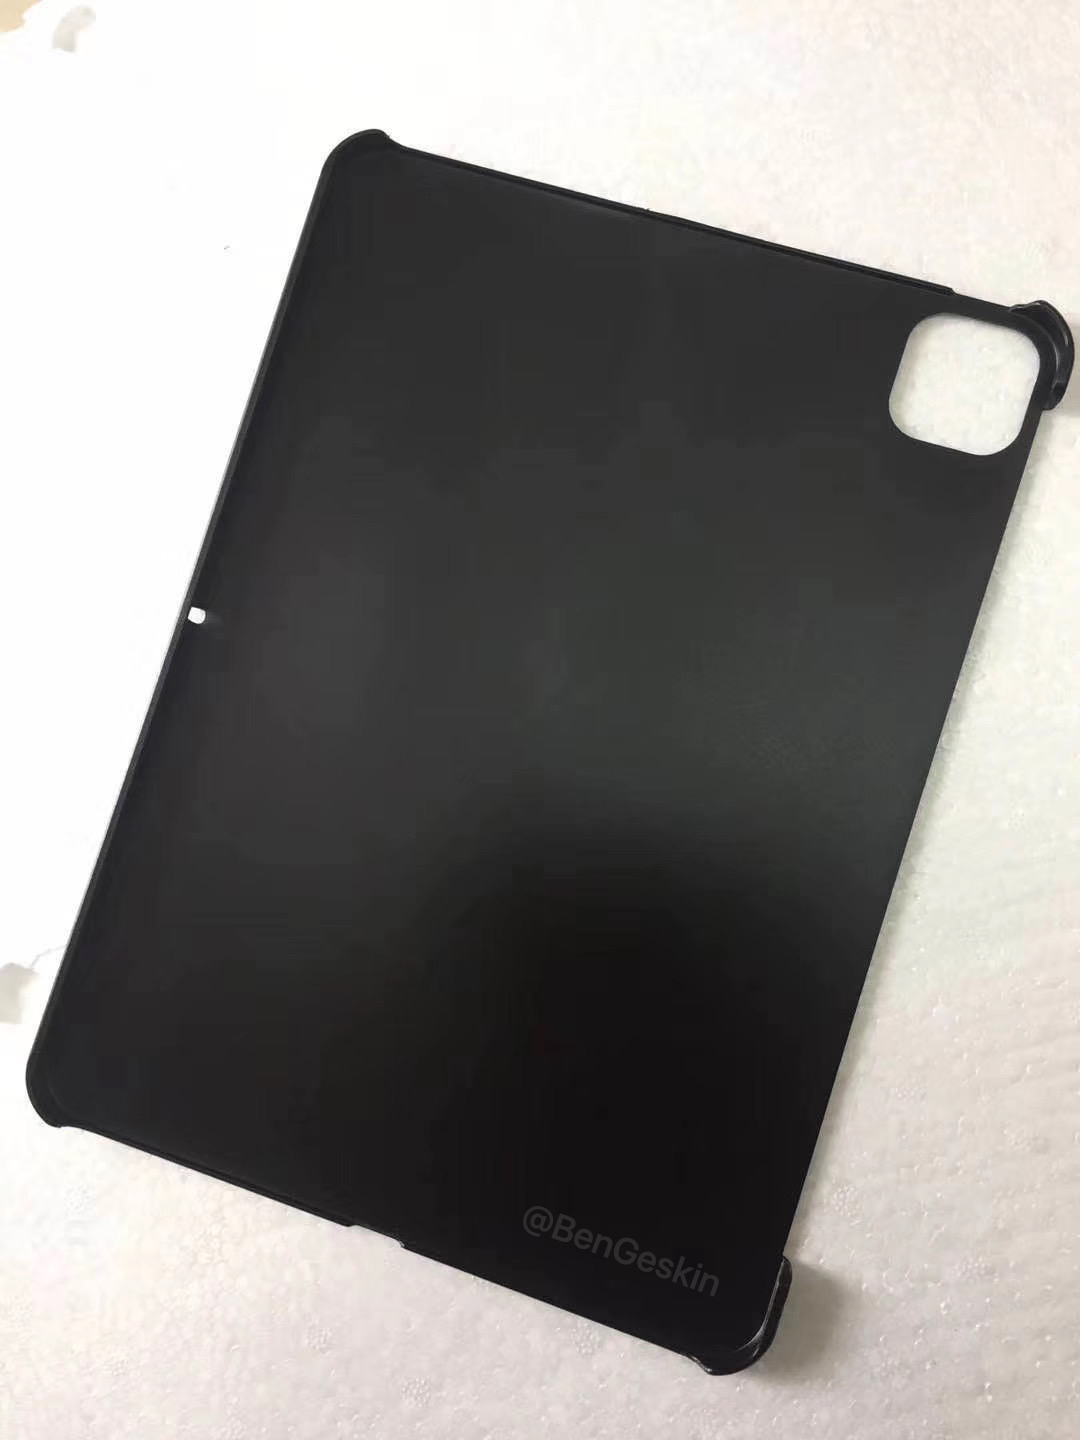 Alleged Case for New iPad Pro Features Square Camera Cutout [Images]